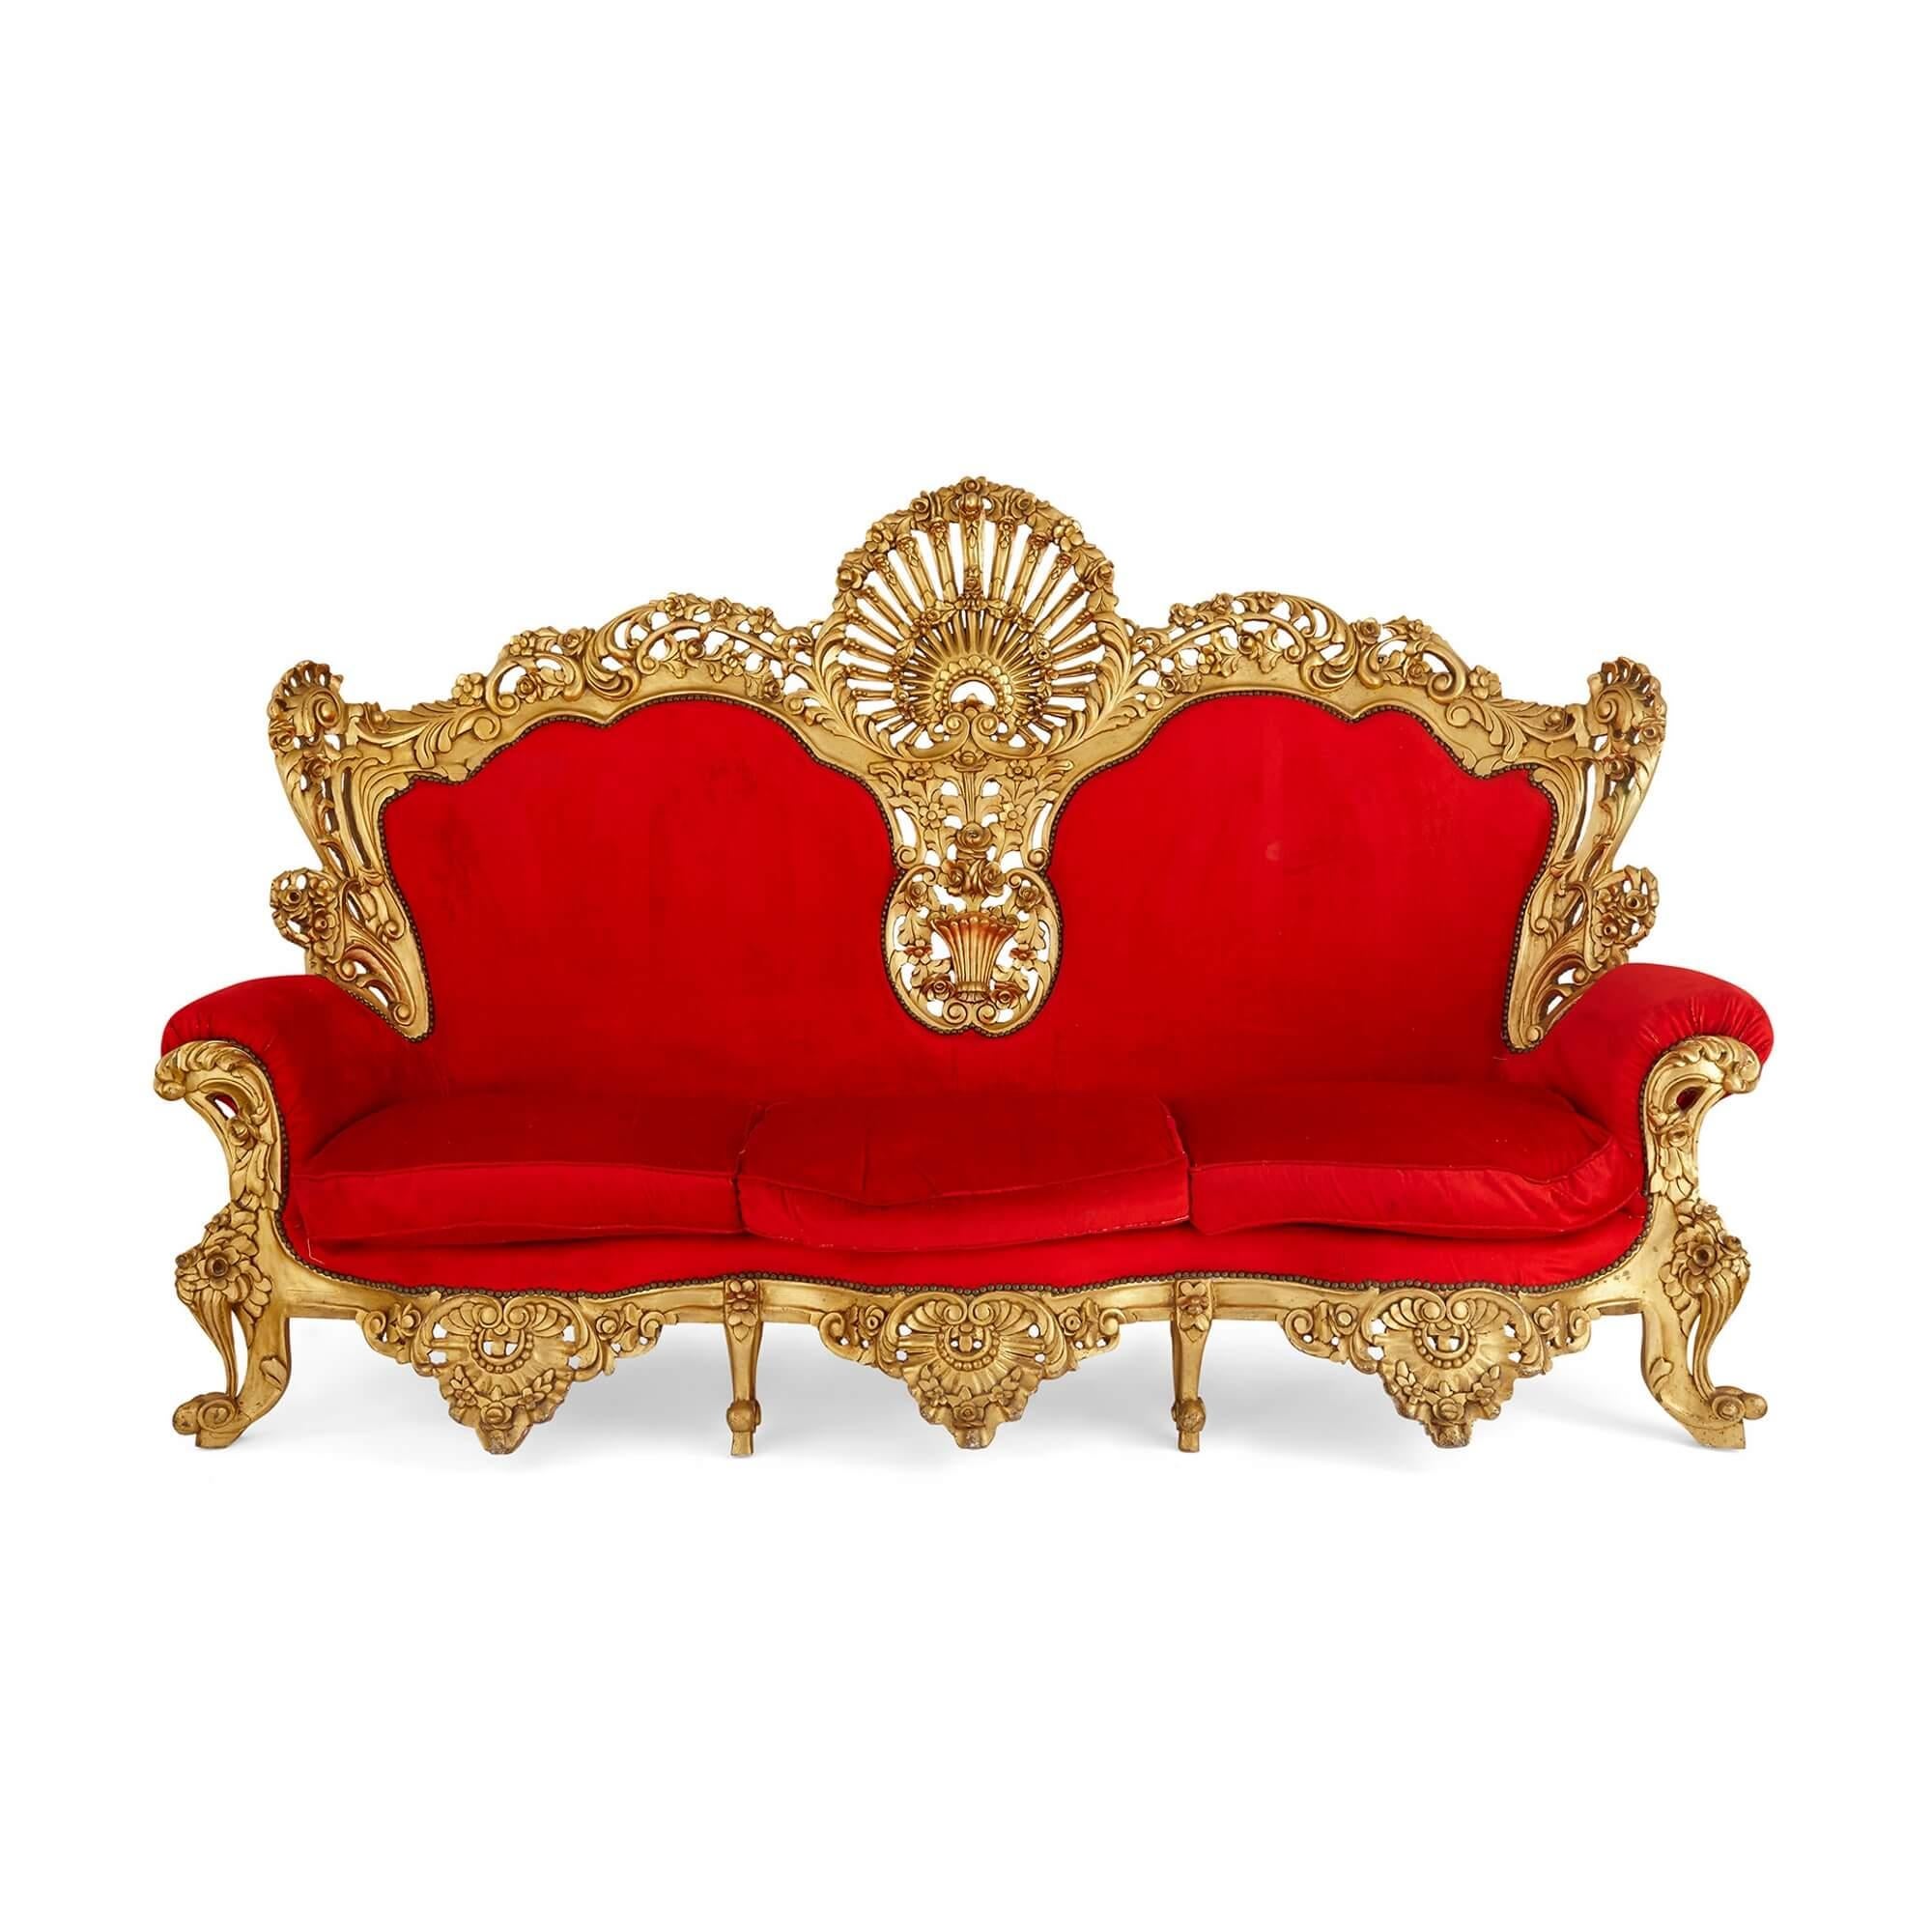 Italian Baroque style three-piece upholstery and giltwood seating suite
Italian, 20th century
Measures: Settee: Height 164cm, width 261cm, depth 84cm
Armchairs: Height 151cm, width 106cm, depth 80cm

This fine suite of furniture is an